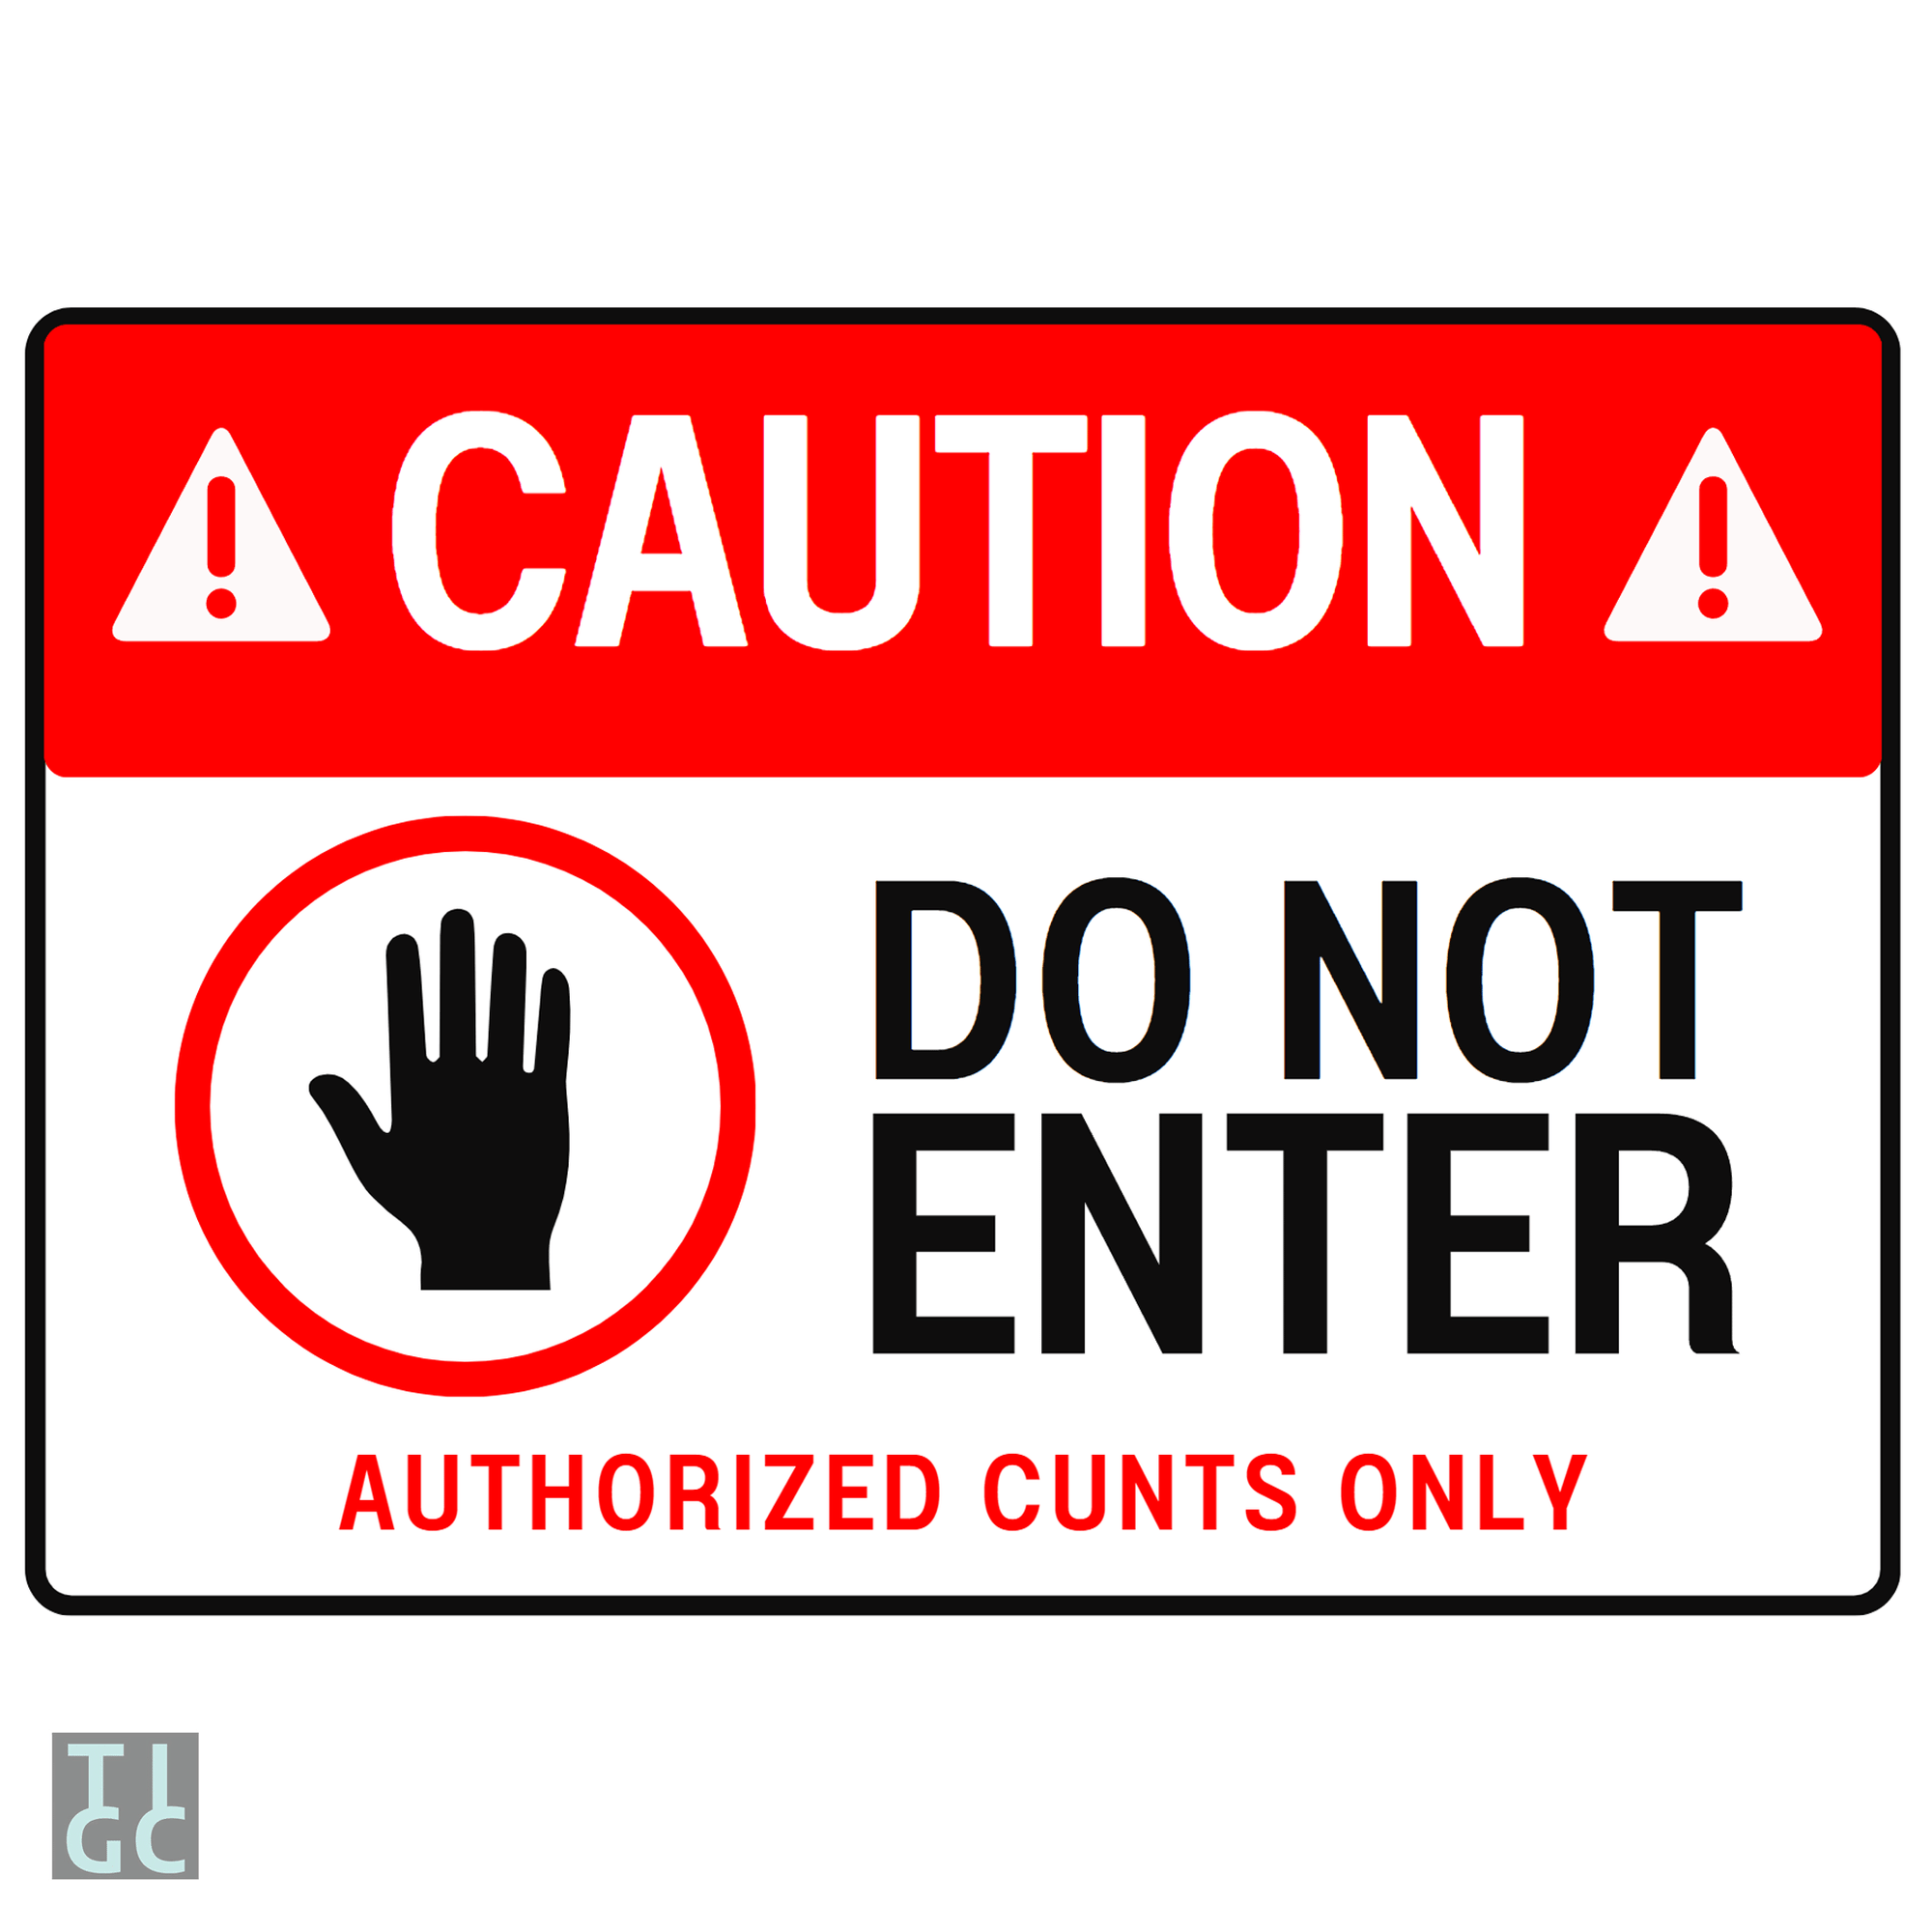 TIGC The Inappropriate Gift Co Caution Do Not Enter Authorised Cunts Only Sign (Digital Download Only)